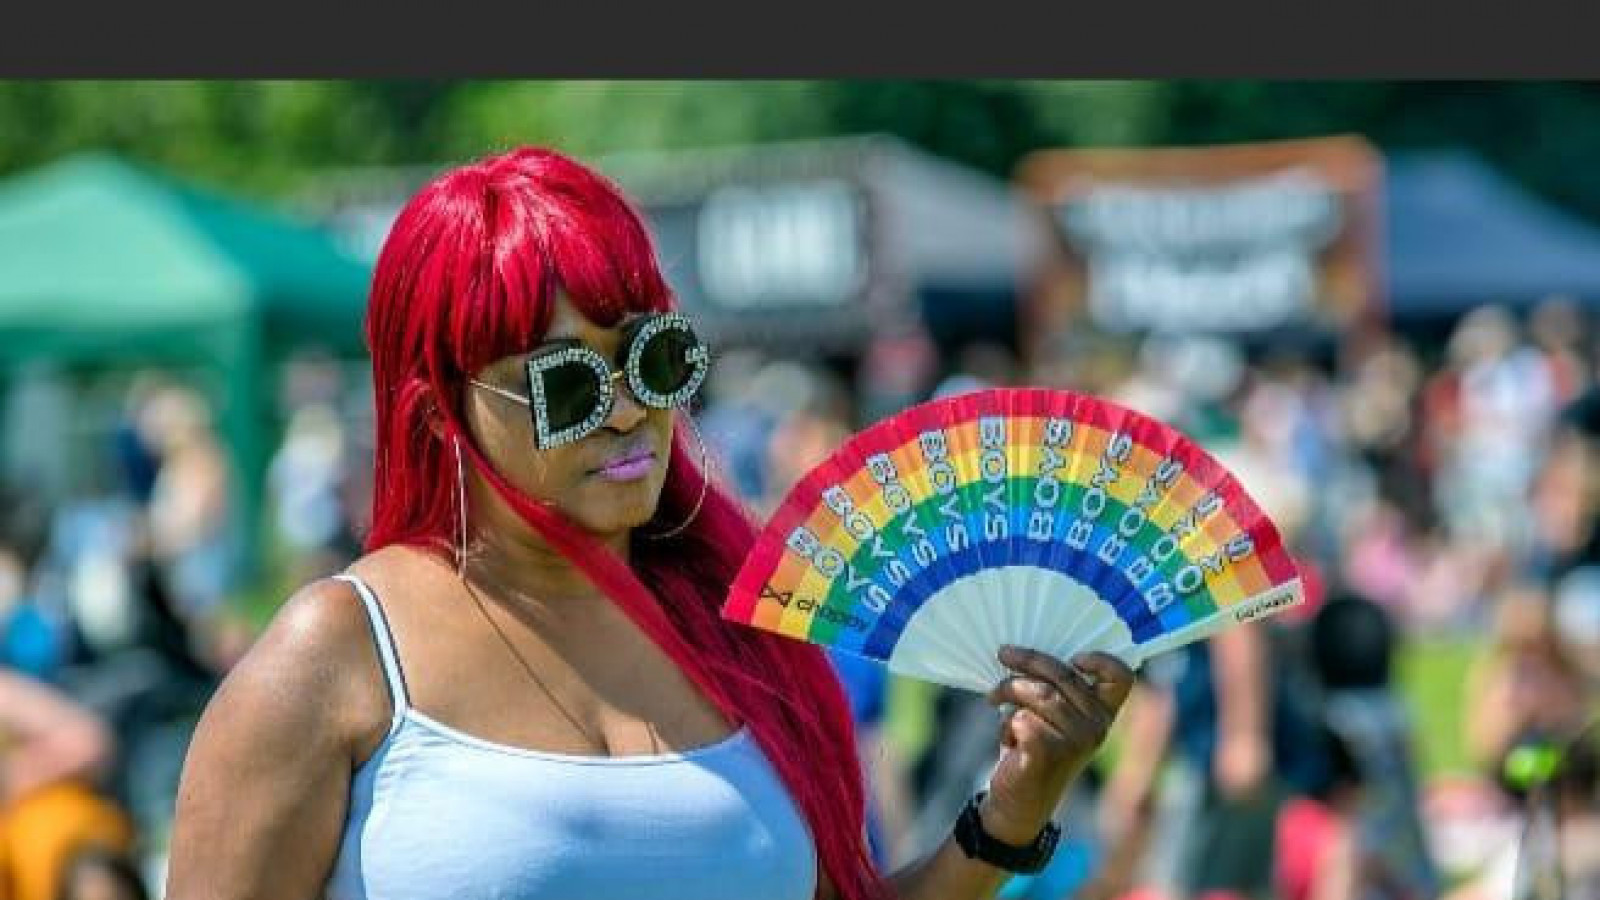 A black woman with long, red-orange hair, wears a white vest top and sunglasses. She is holding a fan coloured with the rainbow like the LGBT+ flag.